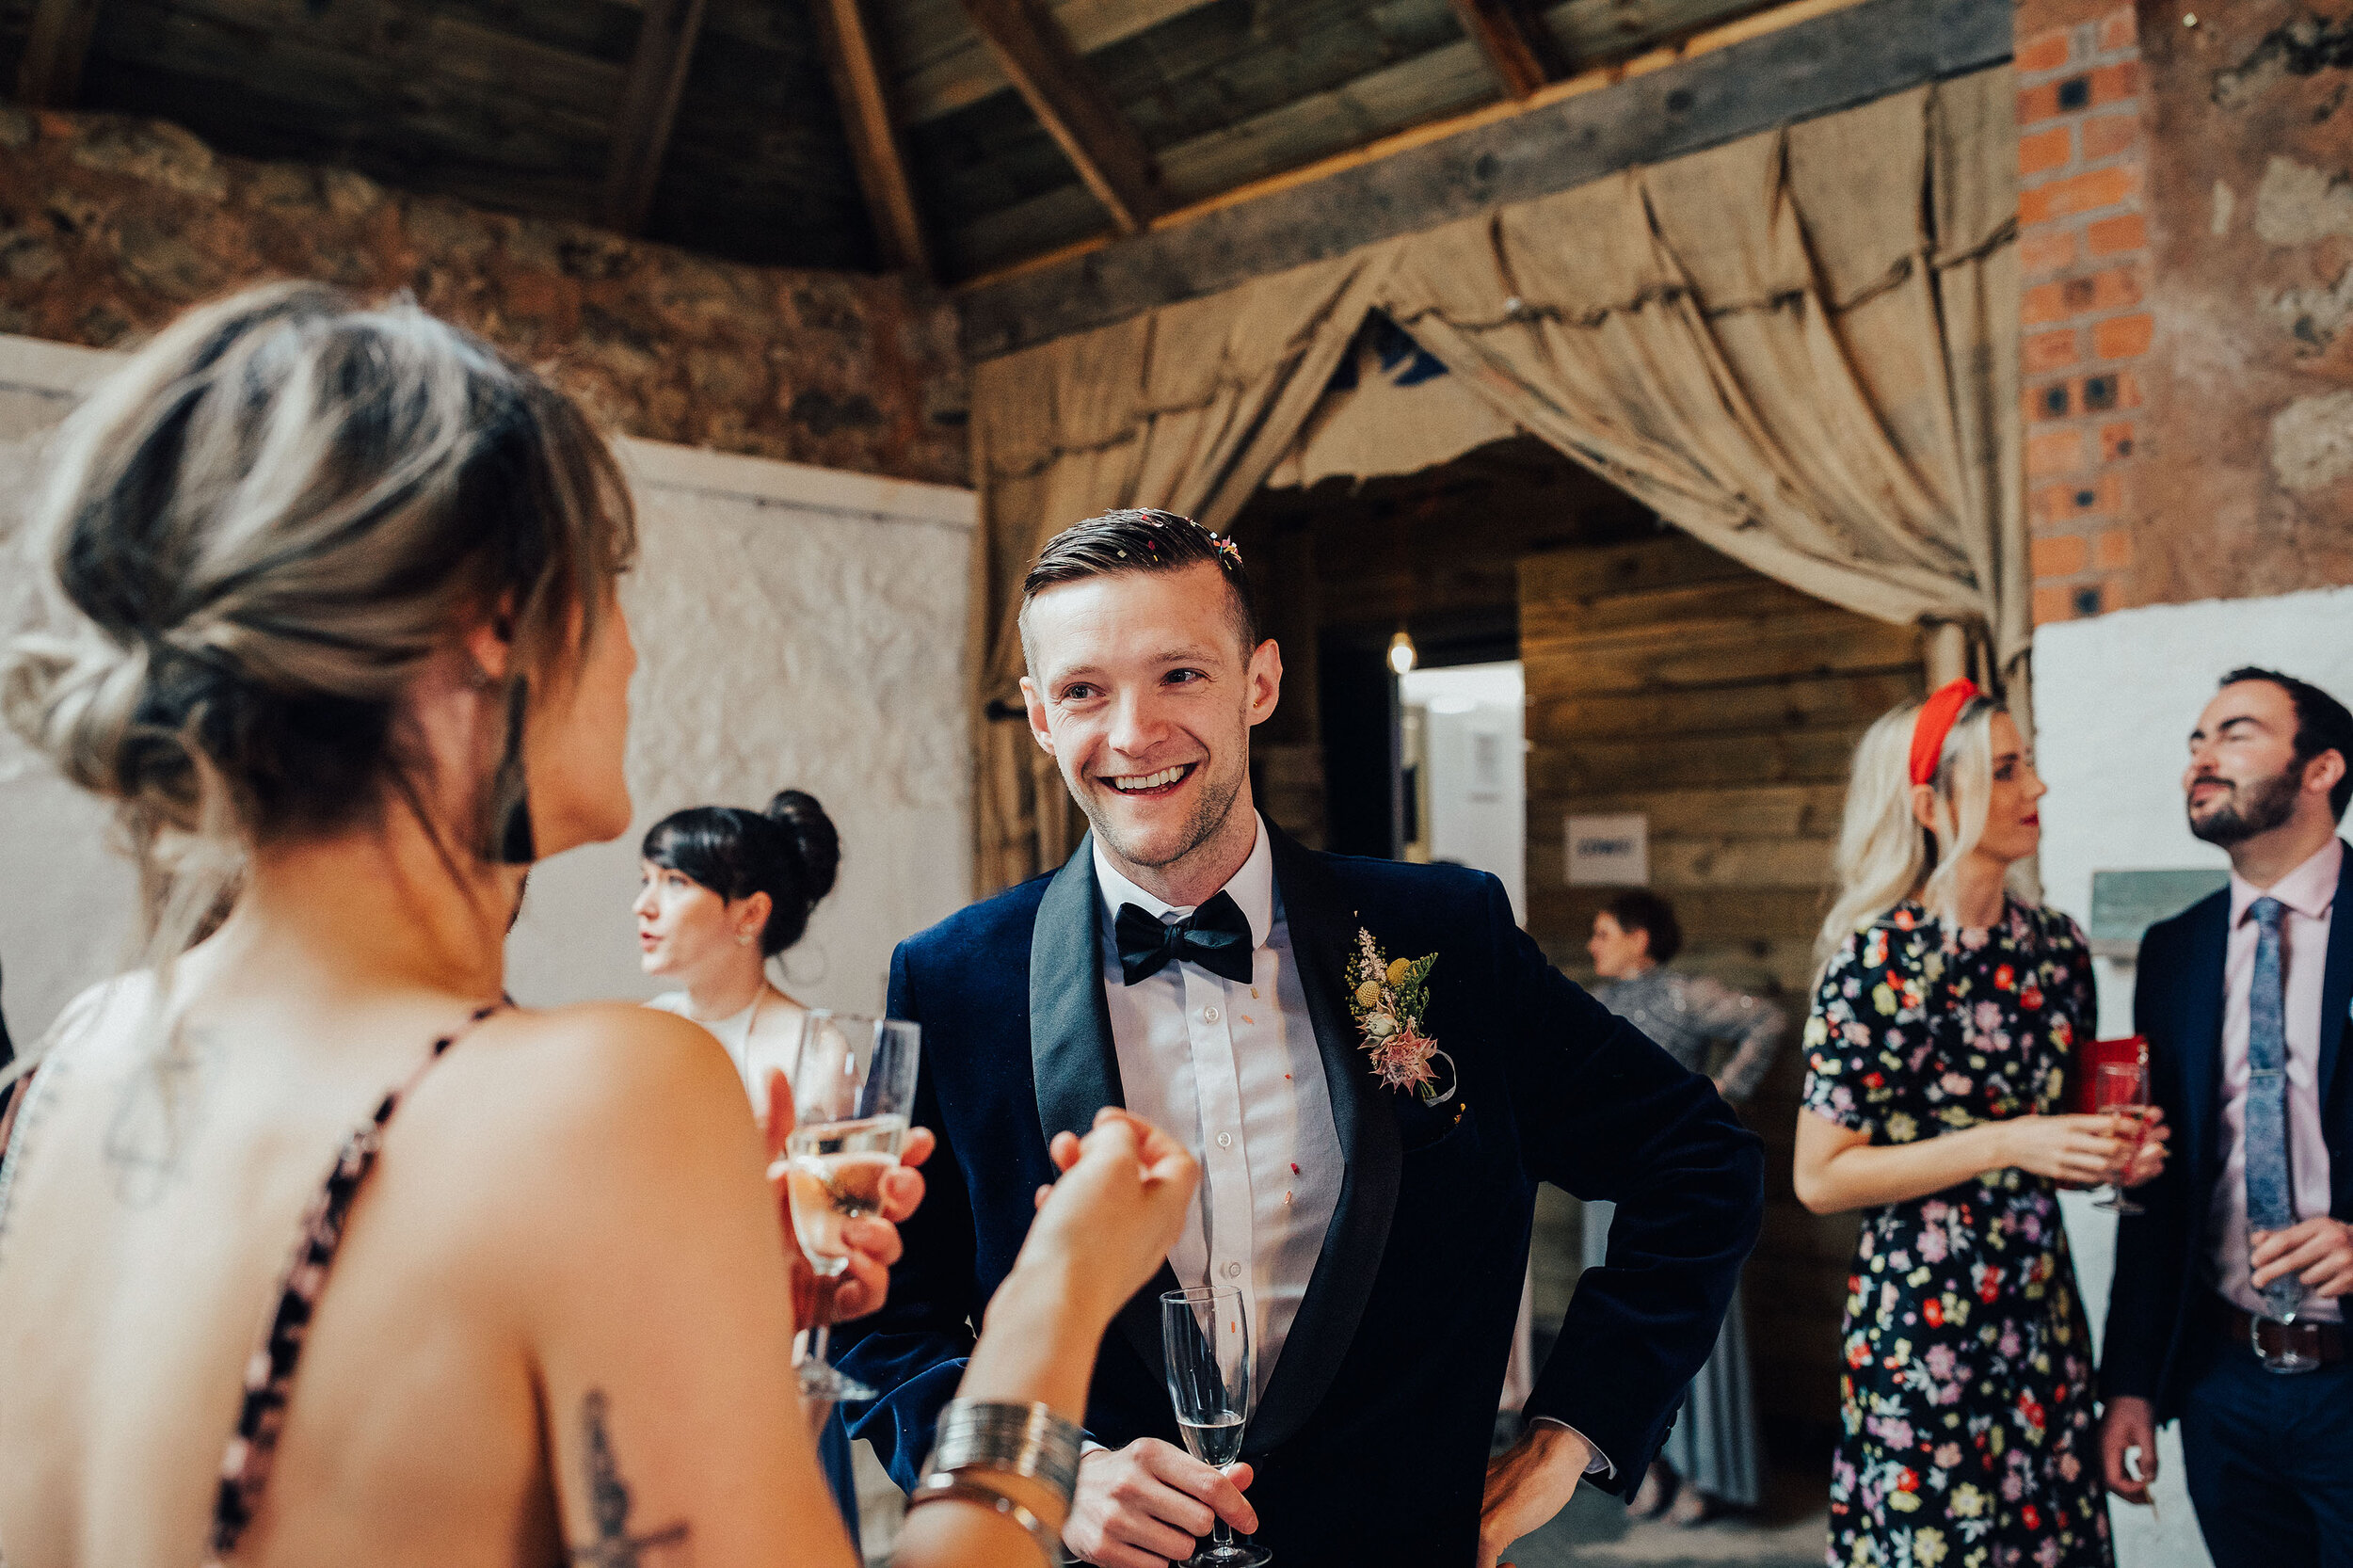 COW_SHED_CRAIL_WEDDING_PJ_PHILLIPS_PHOTOGRAPHY_93.jpg